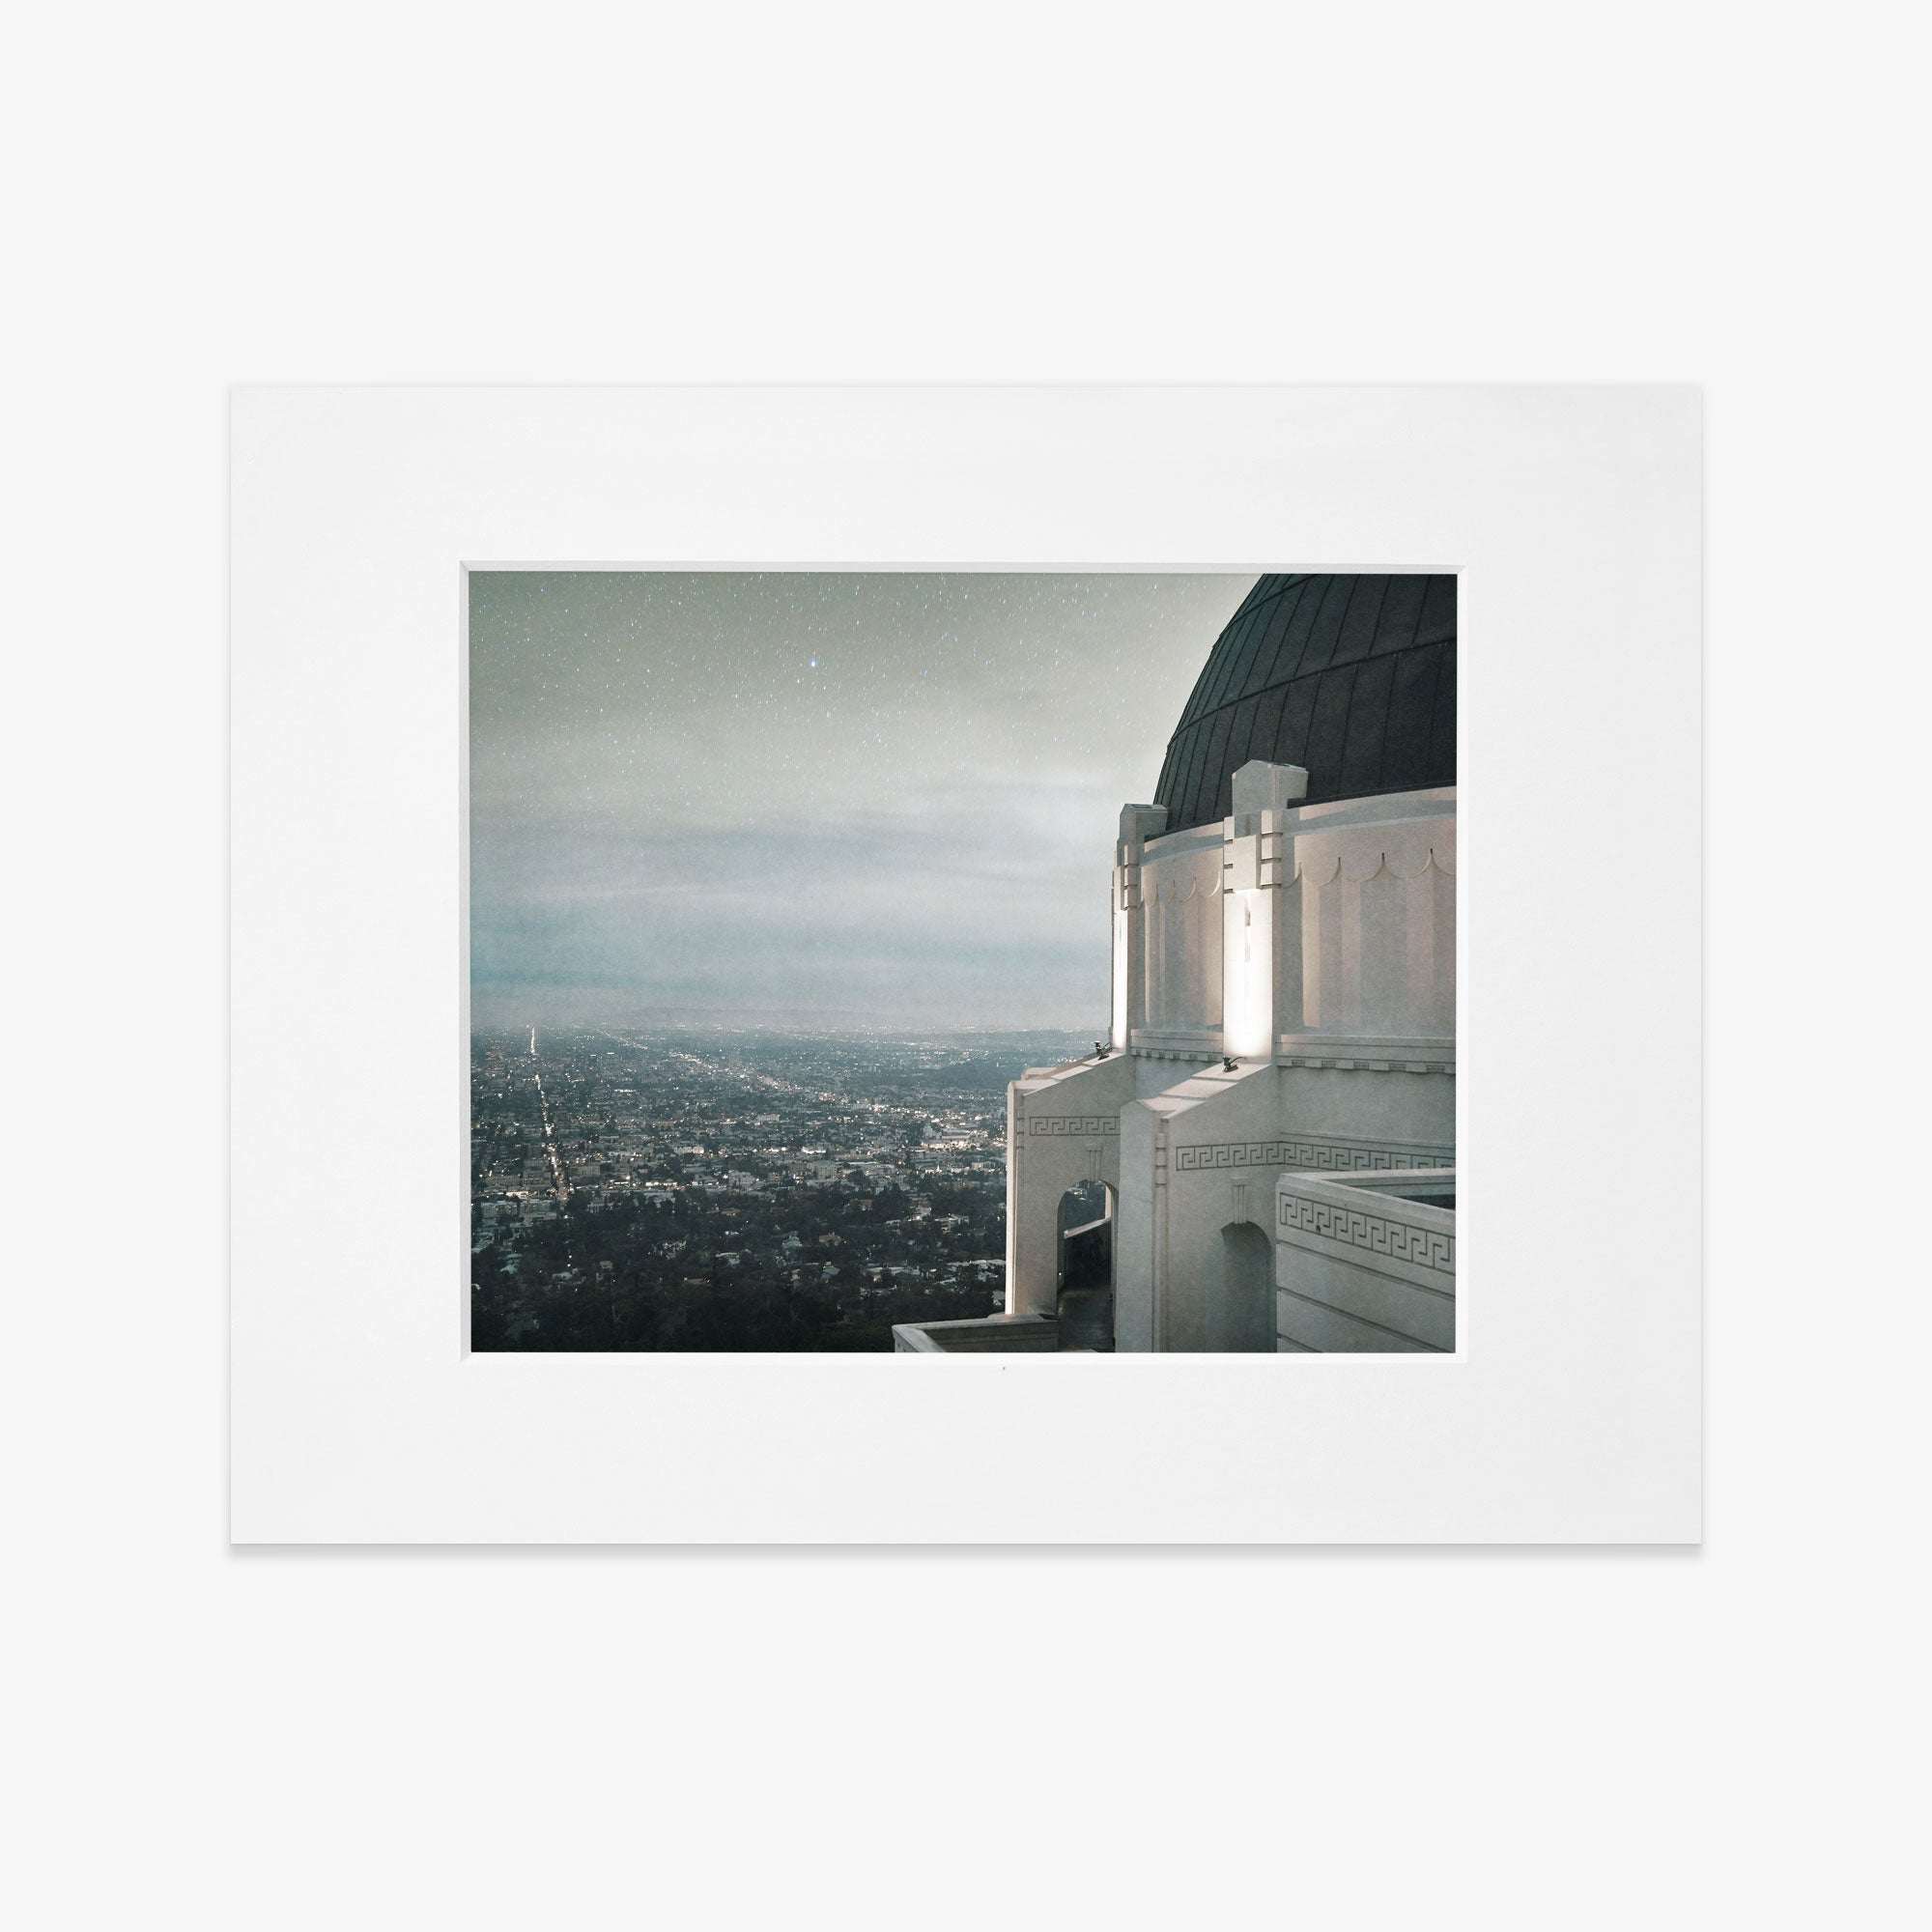 A nighttime photograph framed in white, showcasing the Los Angeles city view from Offley Green&#39;s Griffith Observatory Print, &#39;The Sky At Night&#39;, with twinkling lights under a starry sky.